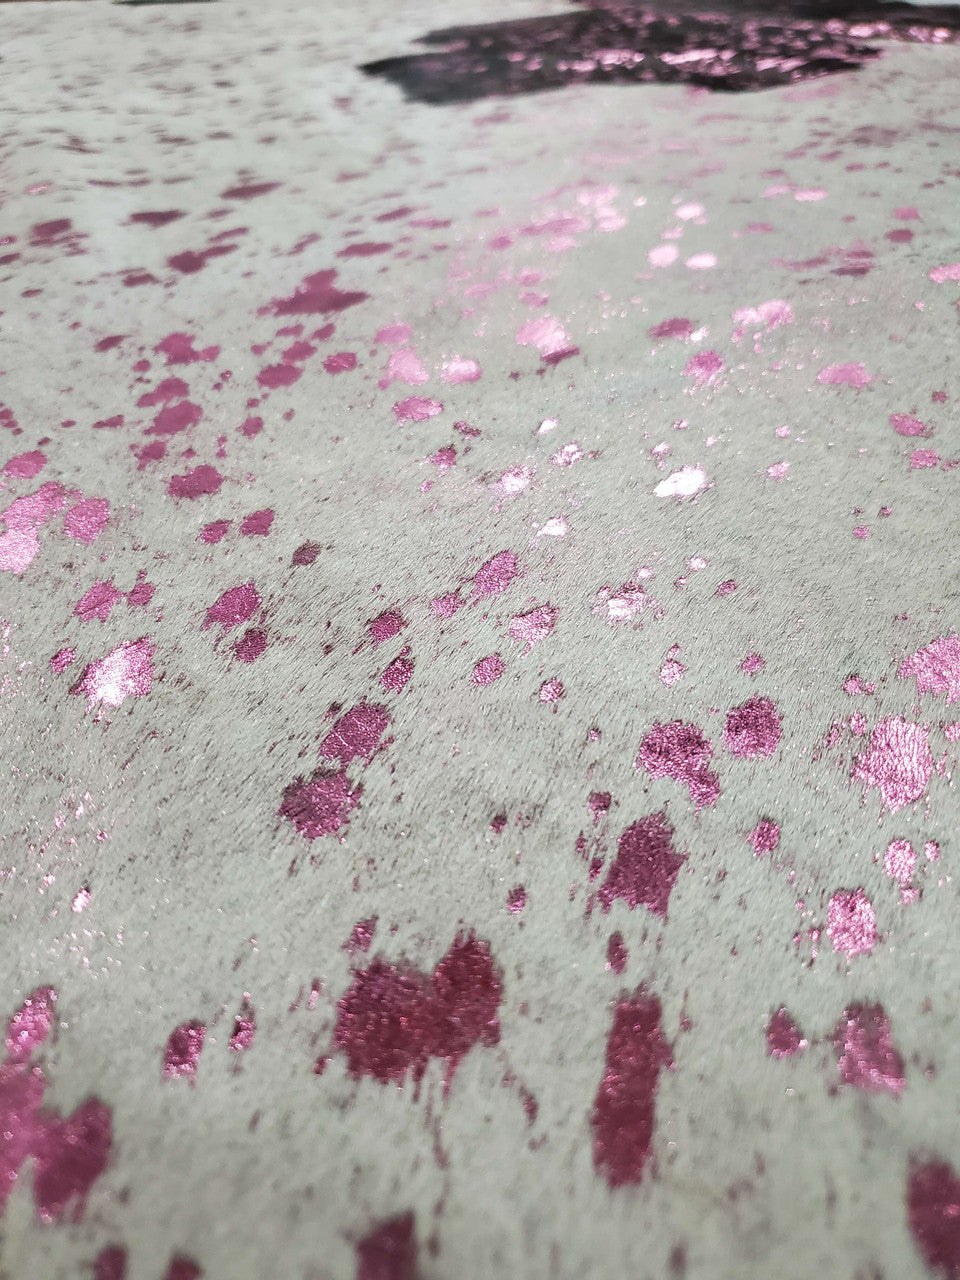 These metal pink Brazilian cowhide rugs are carefully selected with special focus and attention to detail, and handcrafted into practical floor coverings.
